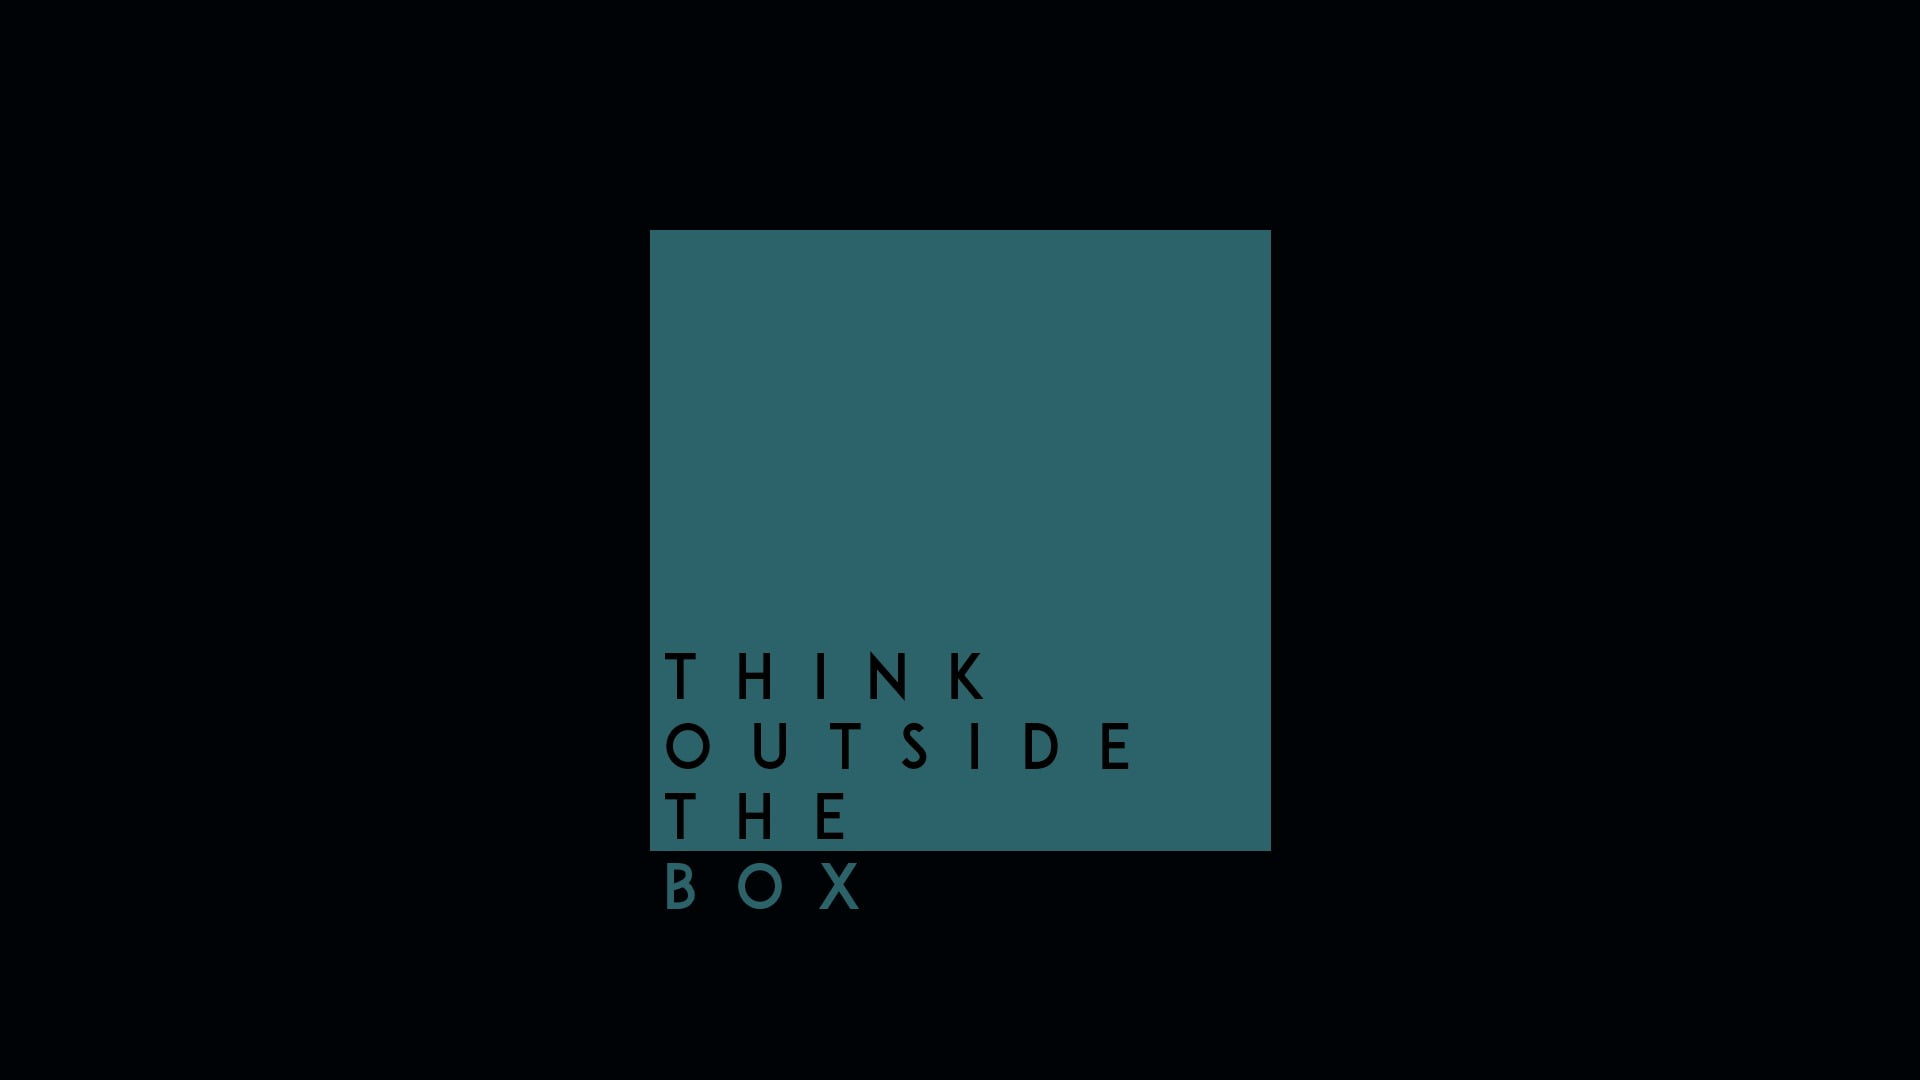 Think Outside The Box wallpaper, simple background, motivational, quote